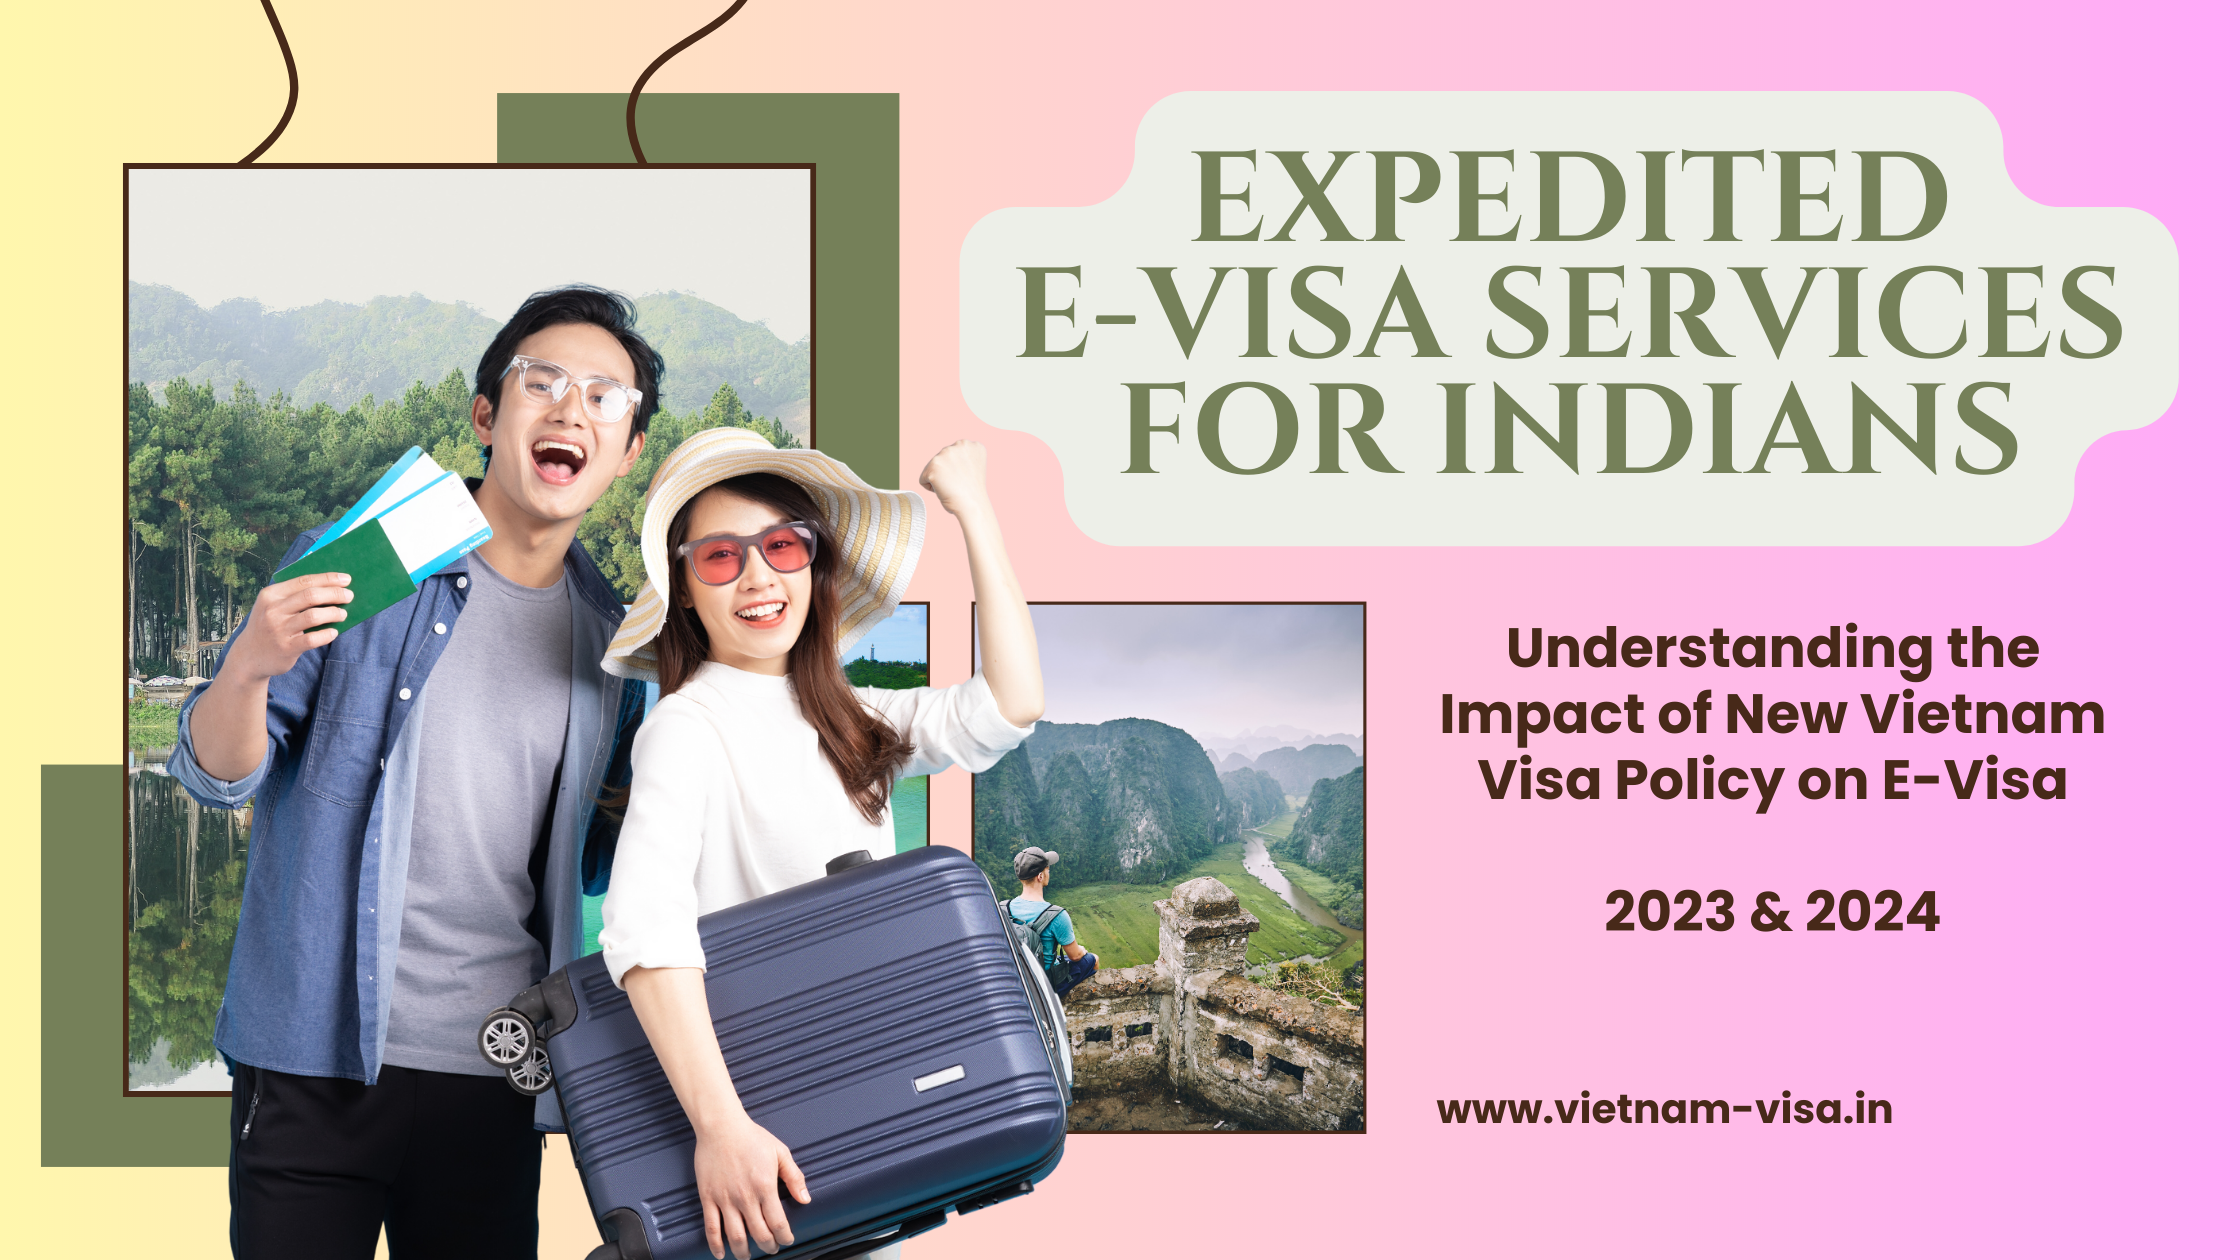 Expedited-Evisa-Services-for-Indian-nationals-2023-2024